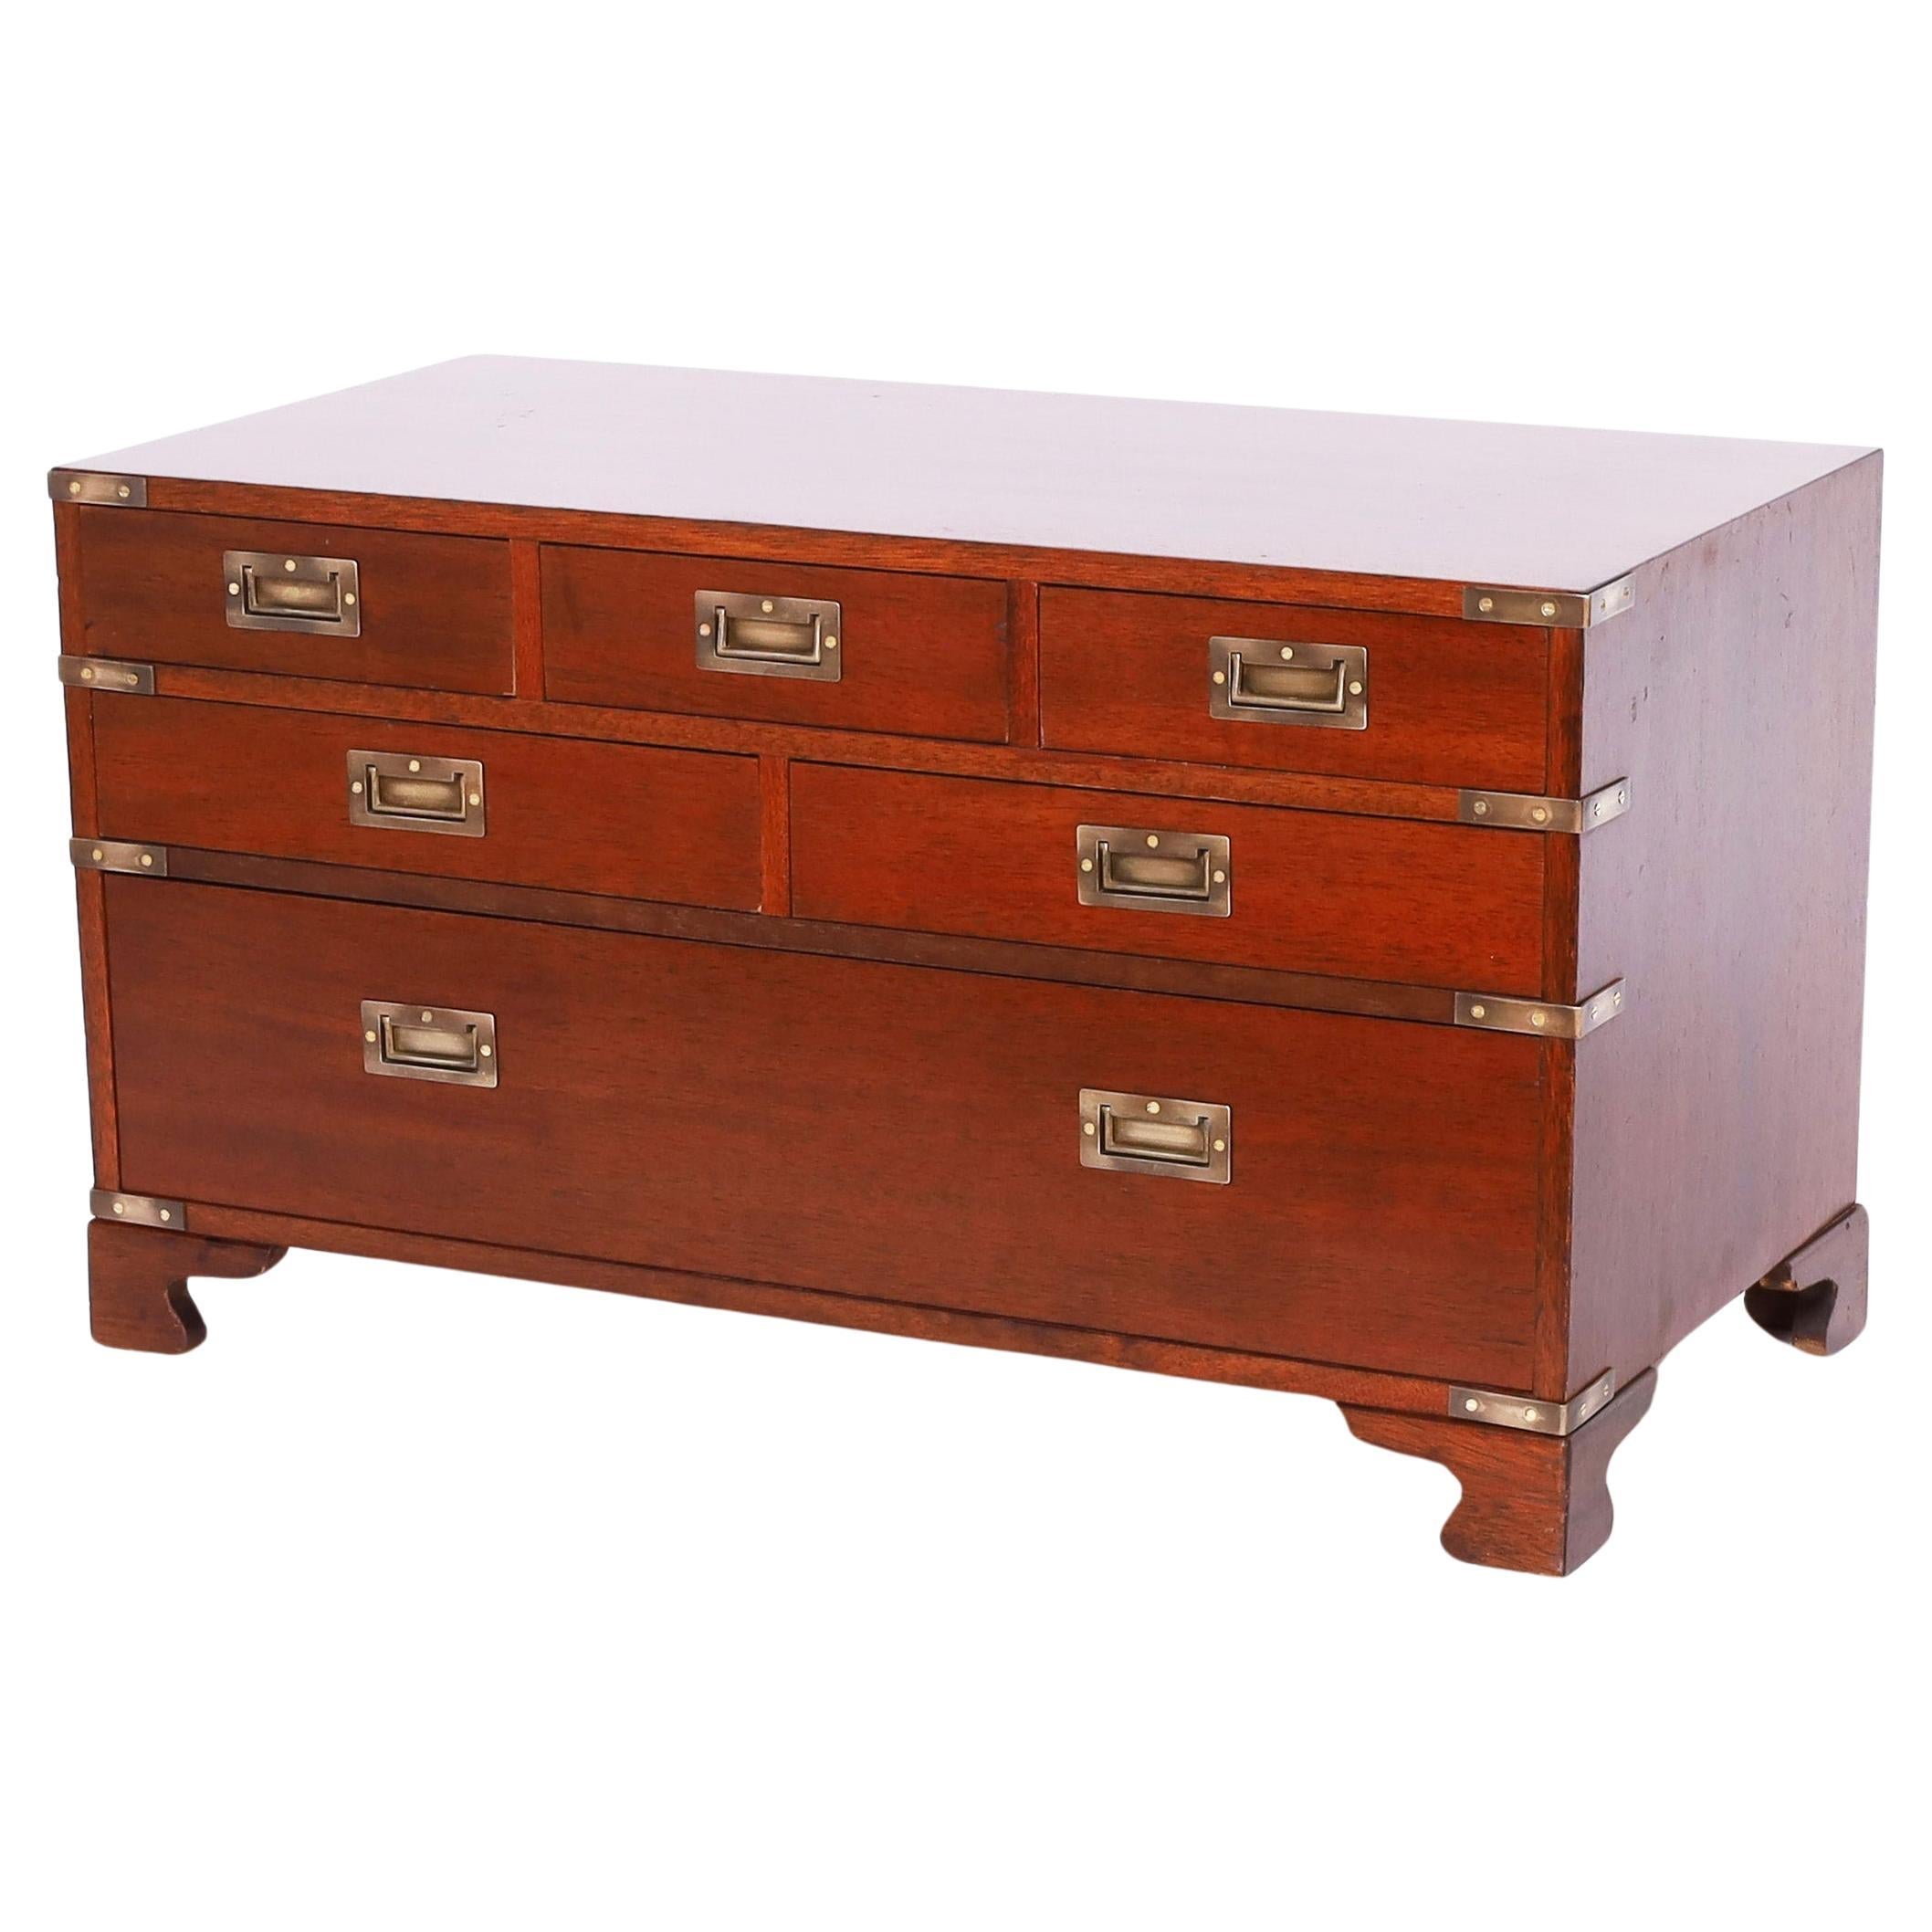 Antique British Colonial Campaign Chest of Drawers For Sale